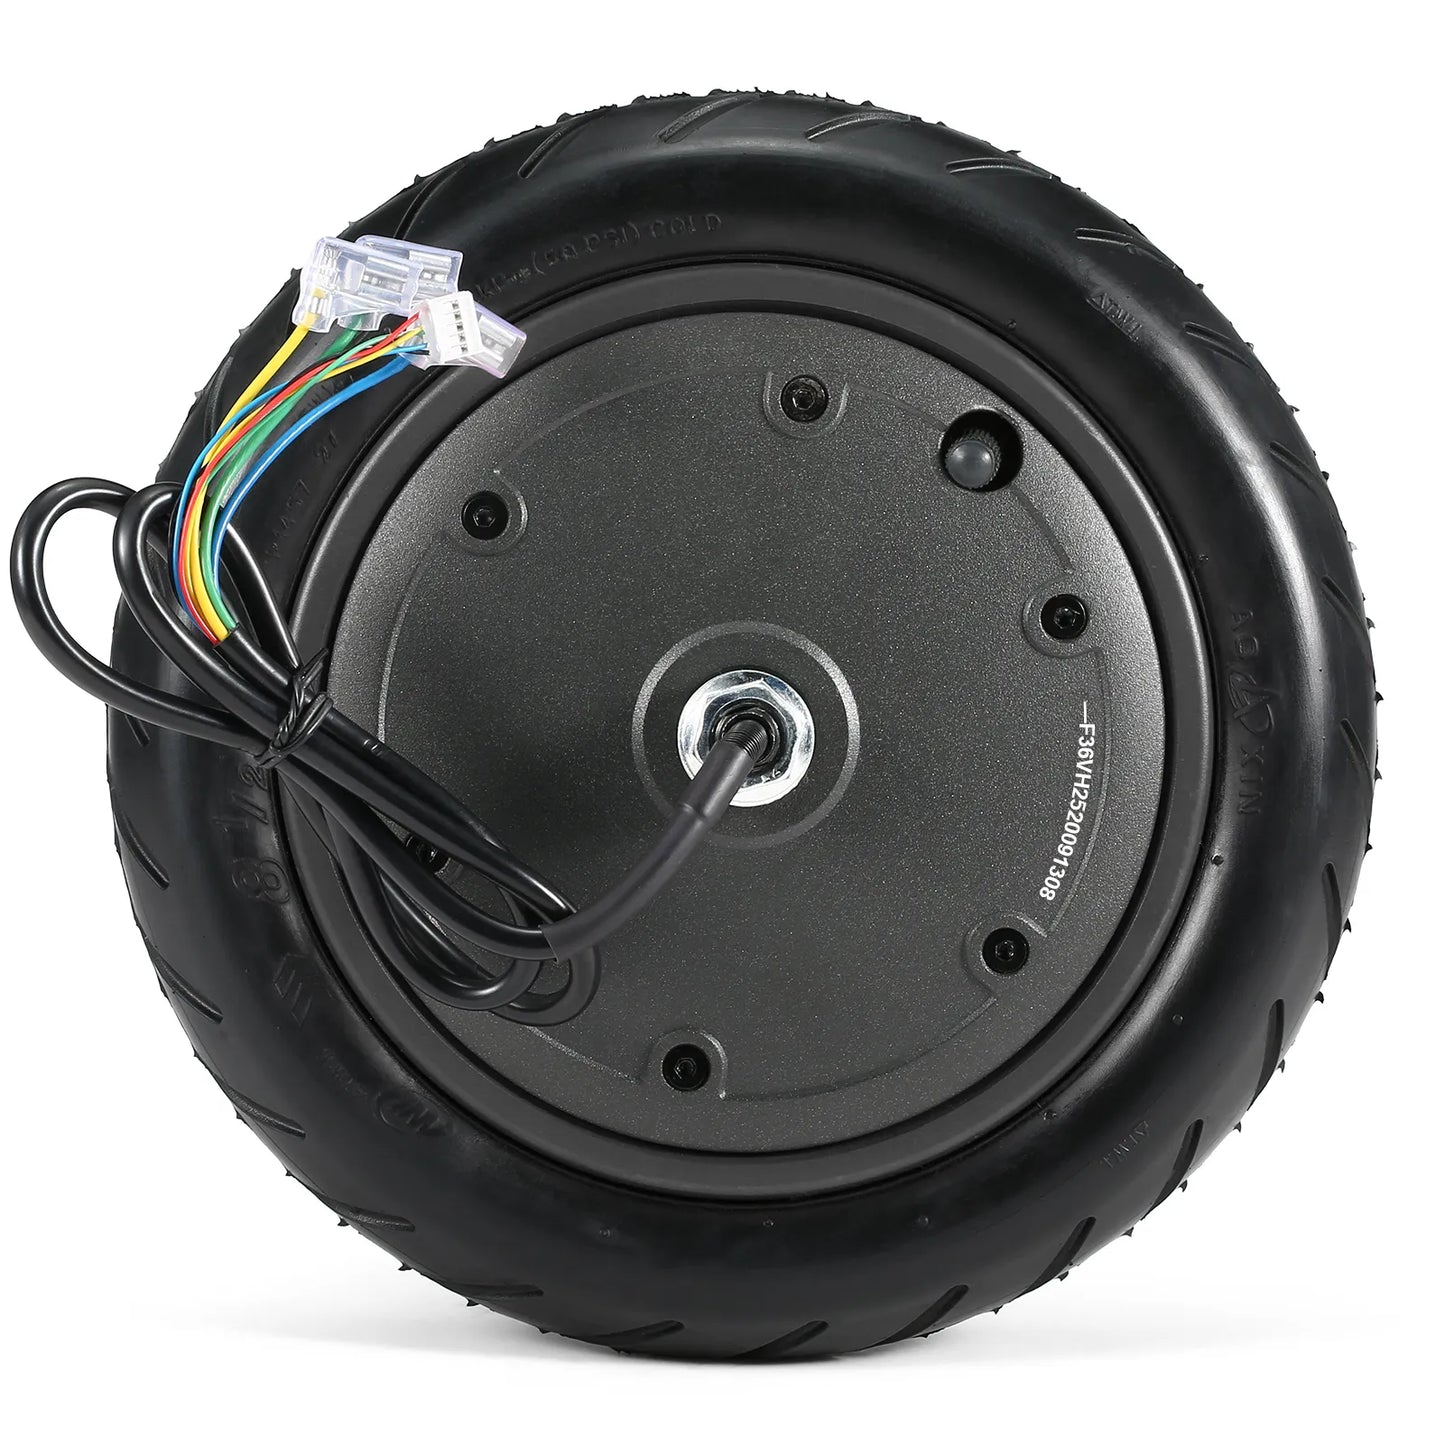 350W Motor with tire